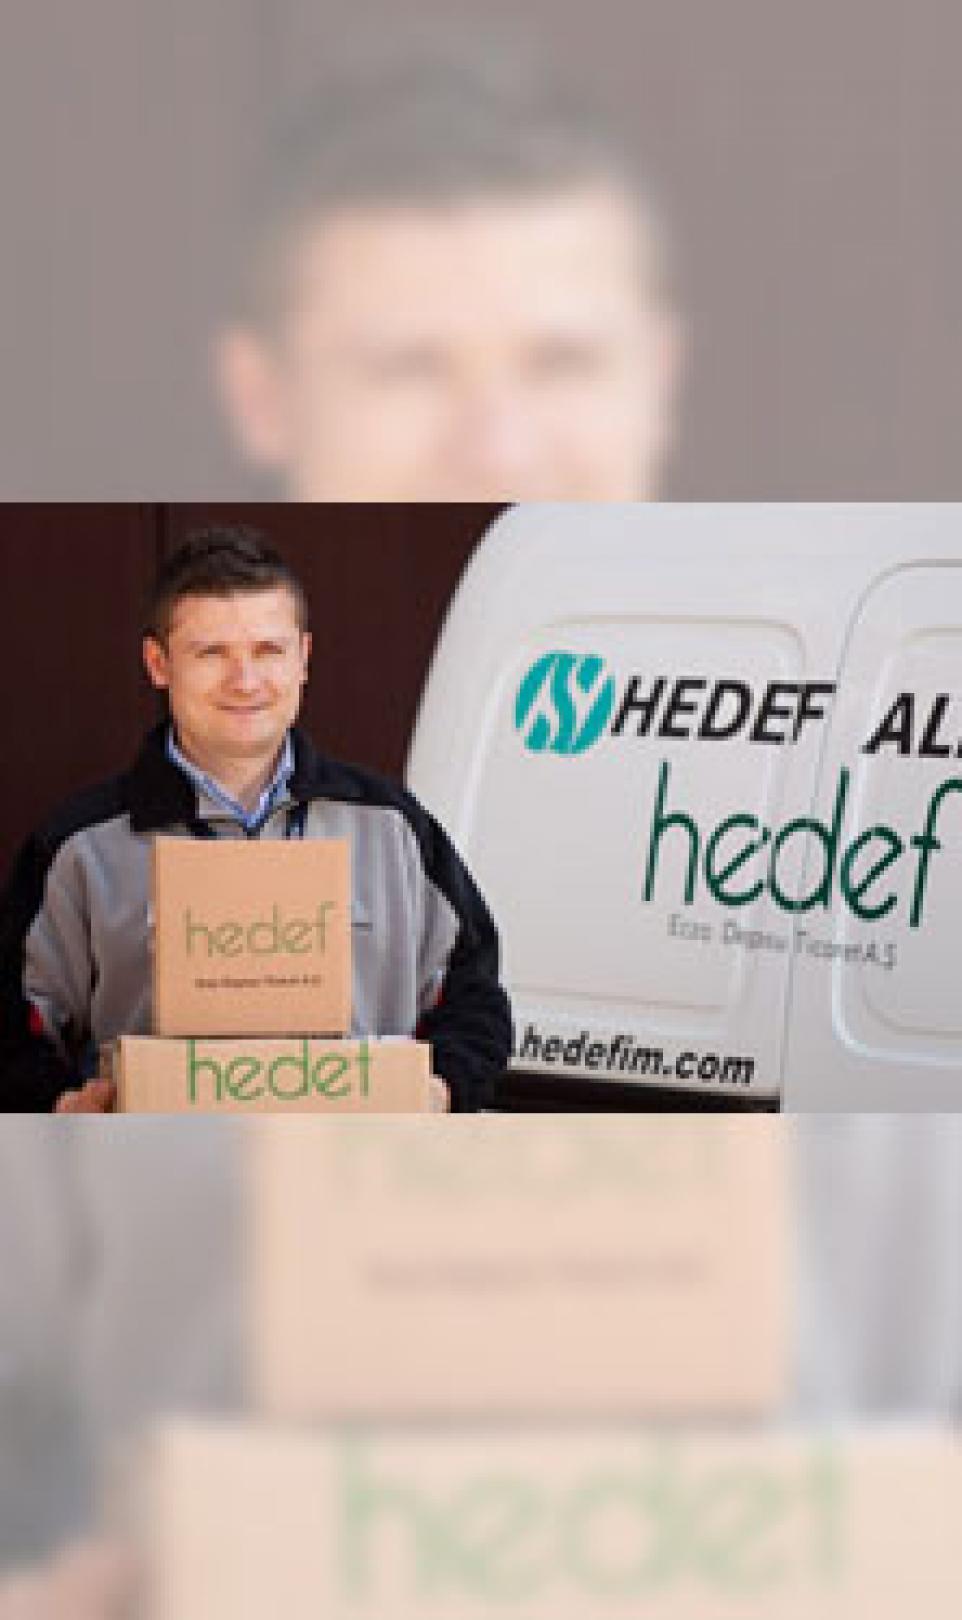 A man carries Hedef Alliance branded cardboard boxes next to a Hedef Alliance white van